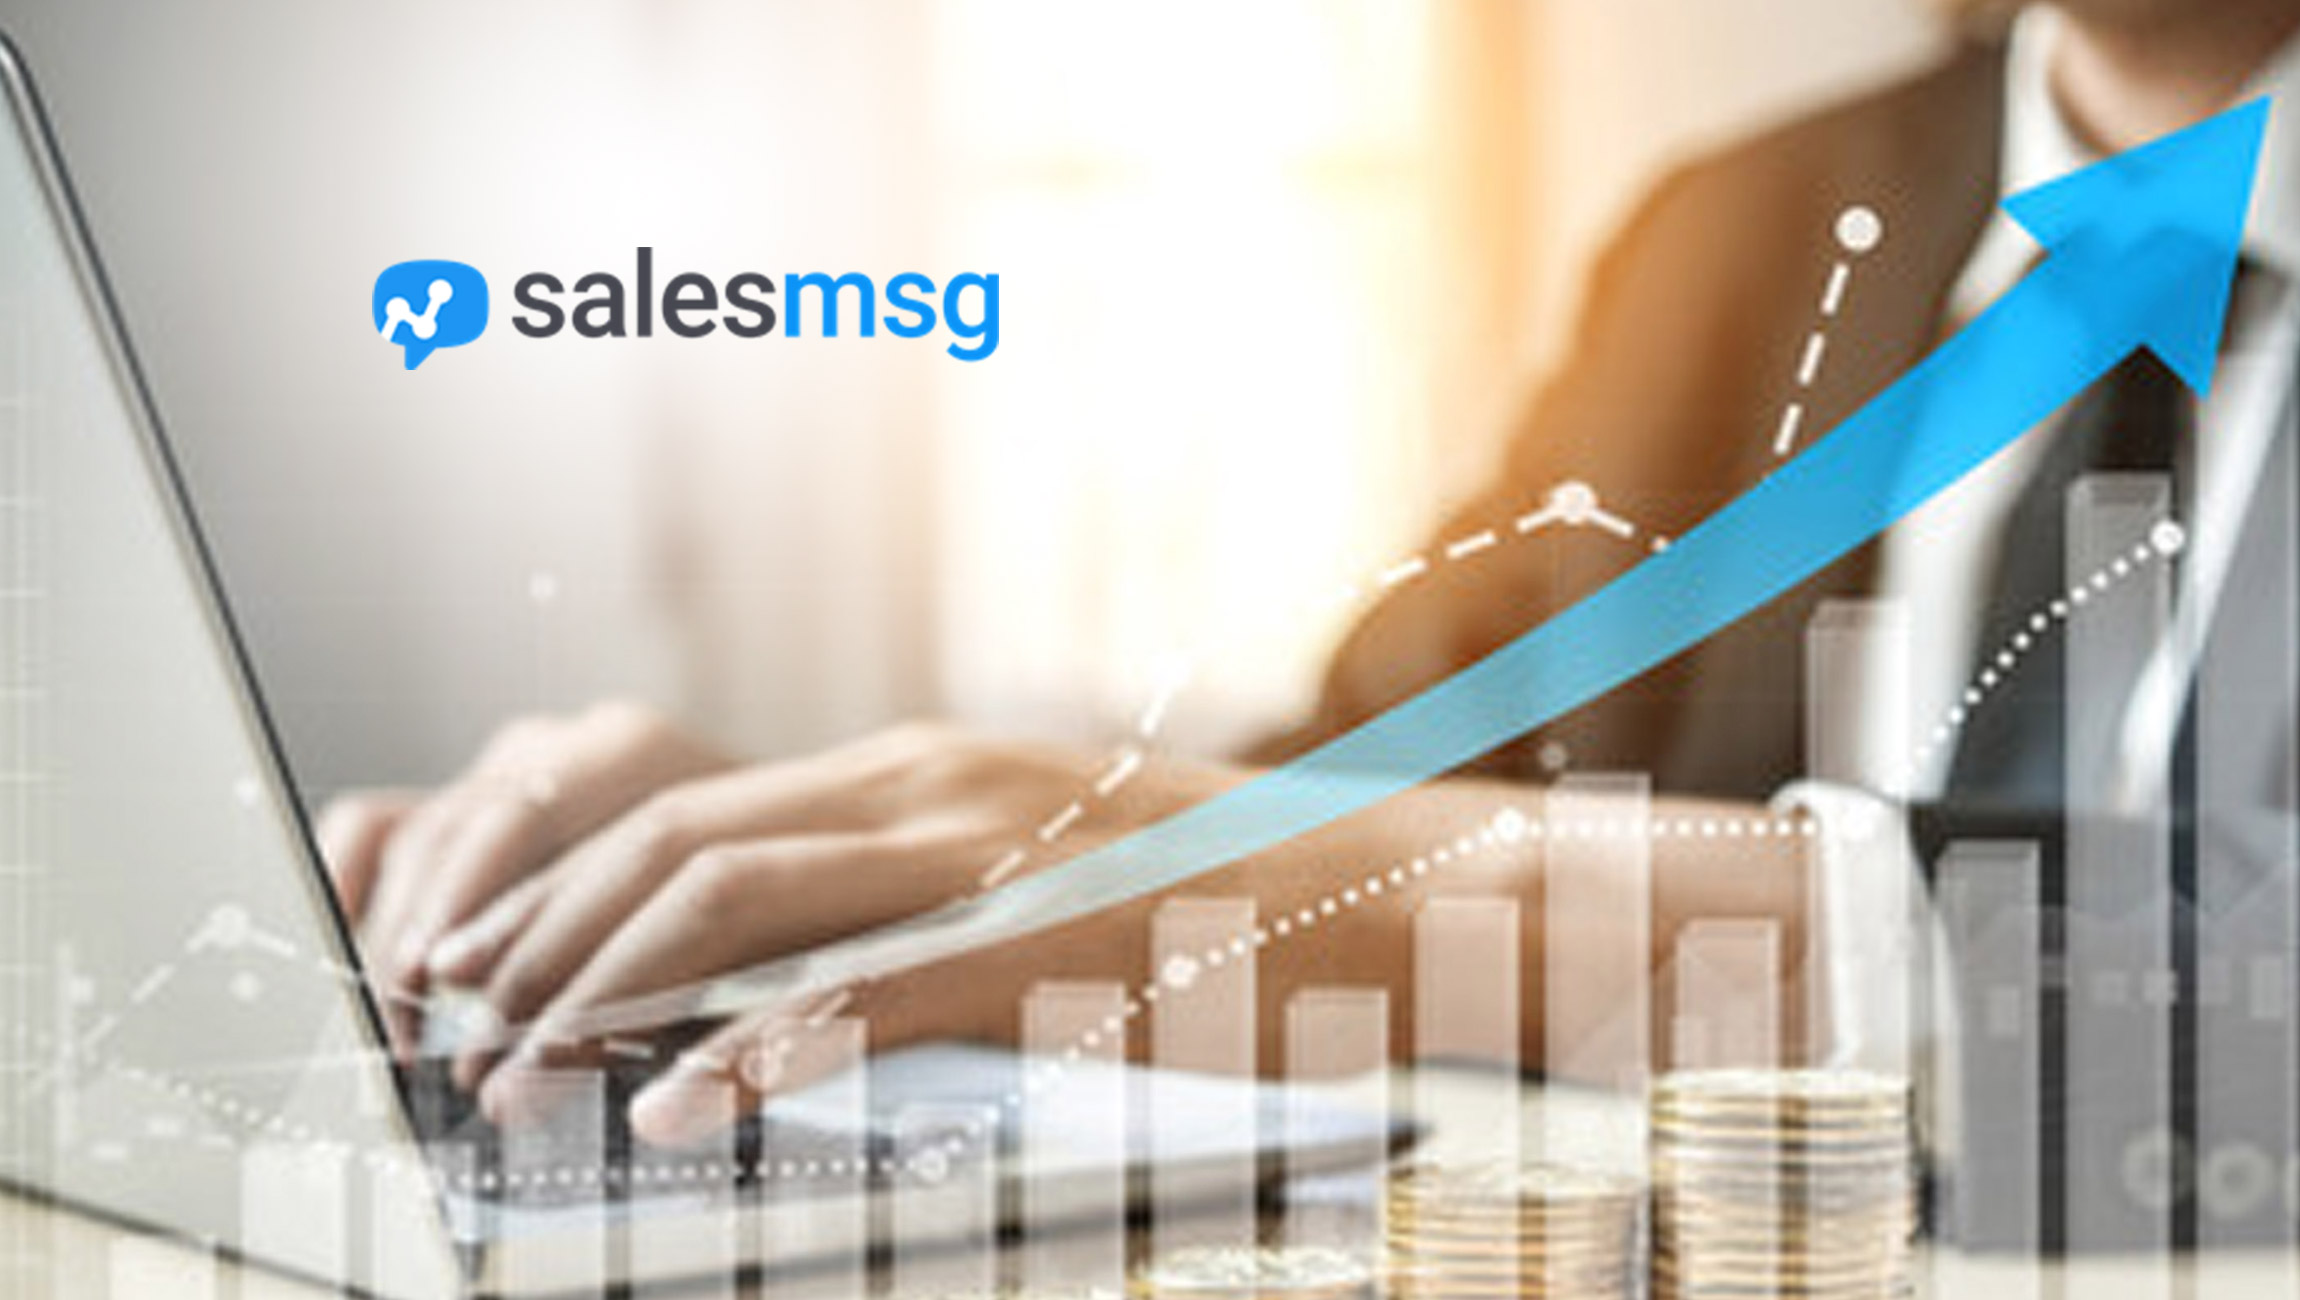 Salesmsg Debuts on the 2022 Inc. 5000 Annual List of Fastest Growing Companies